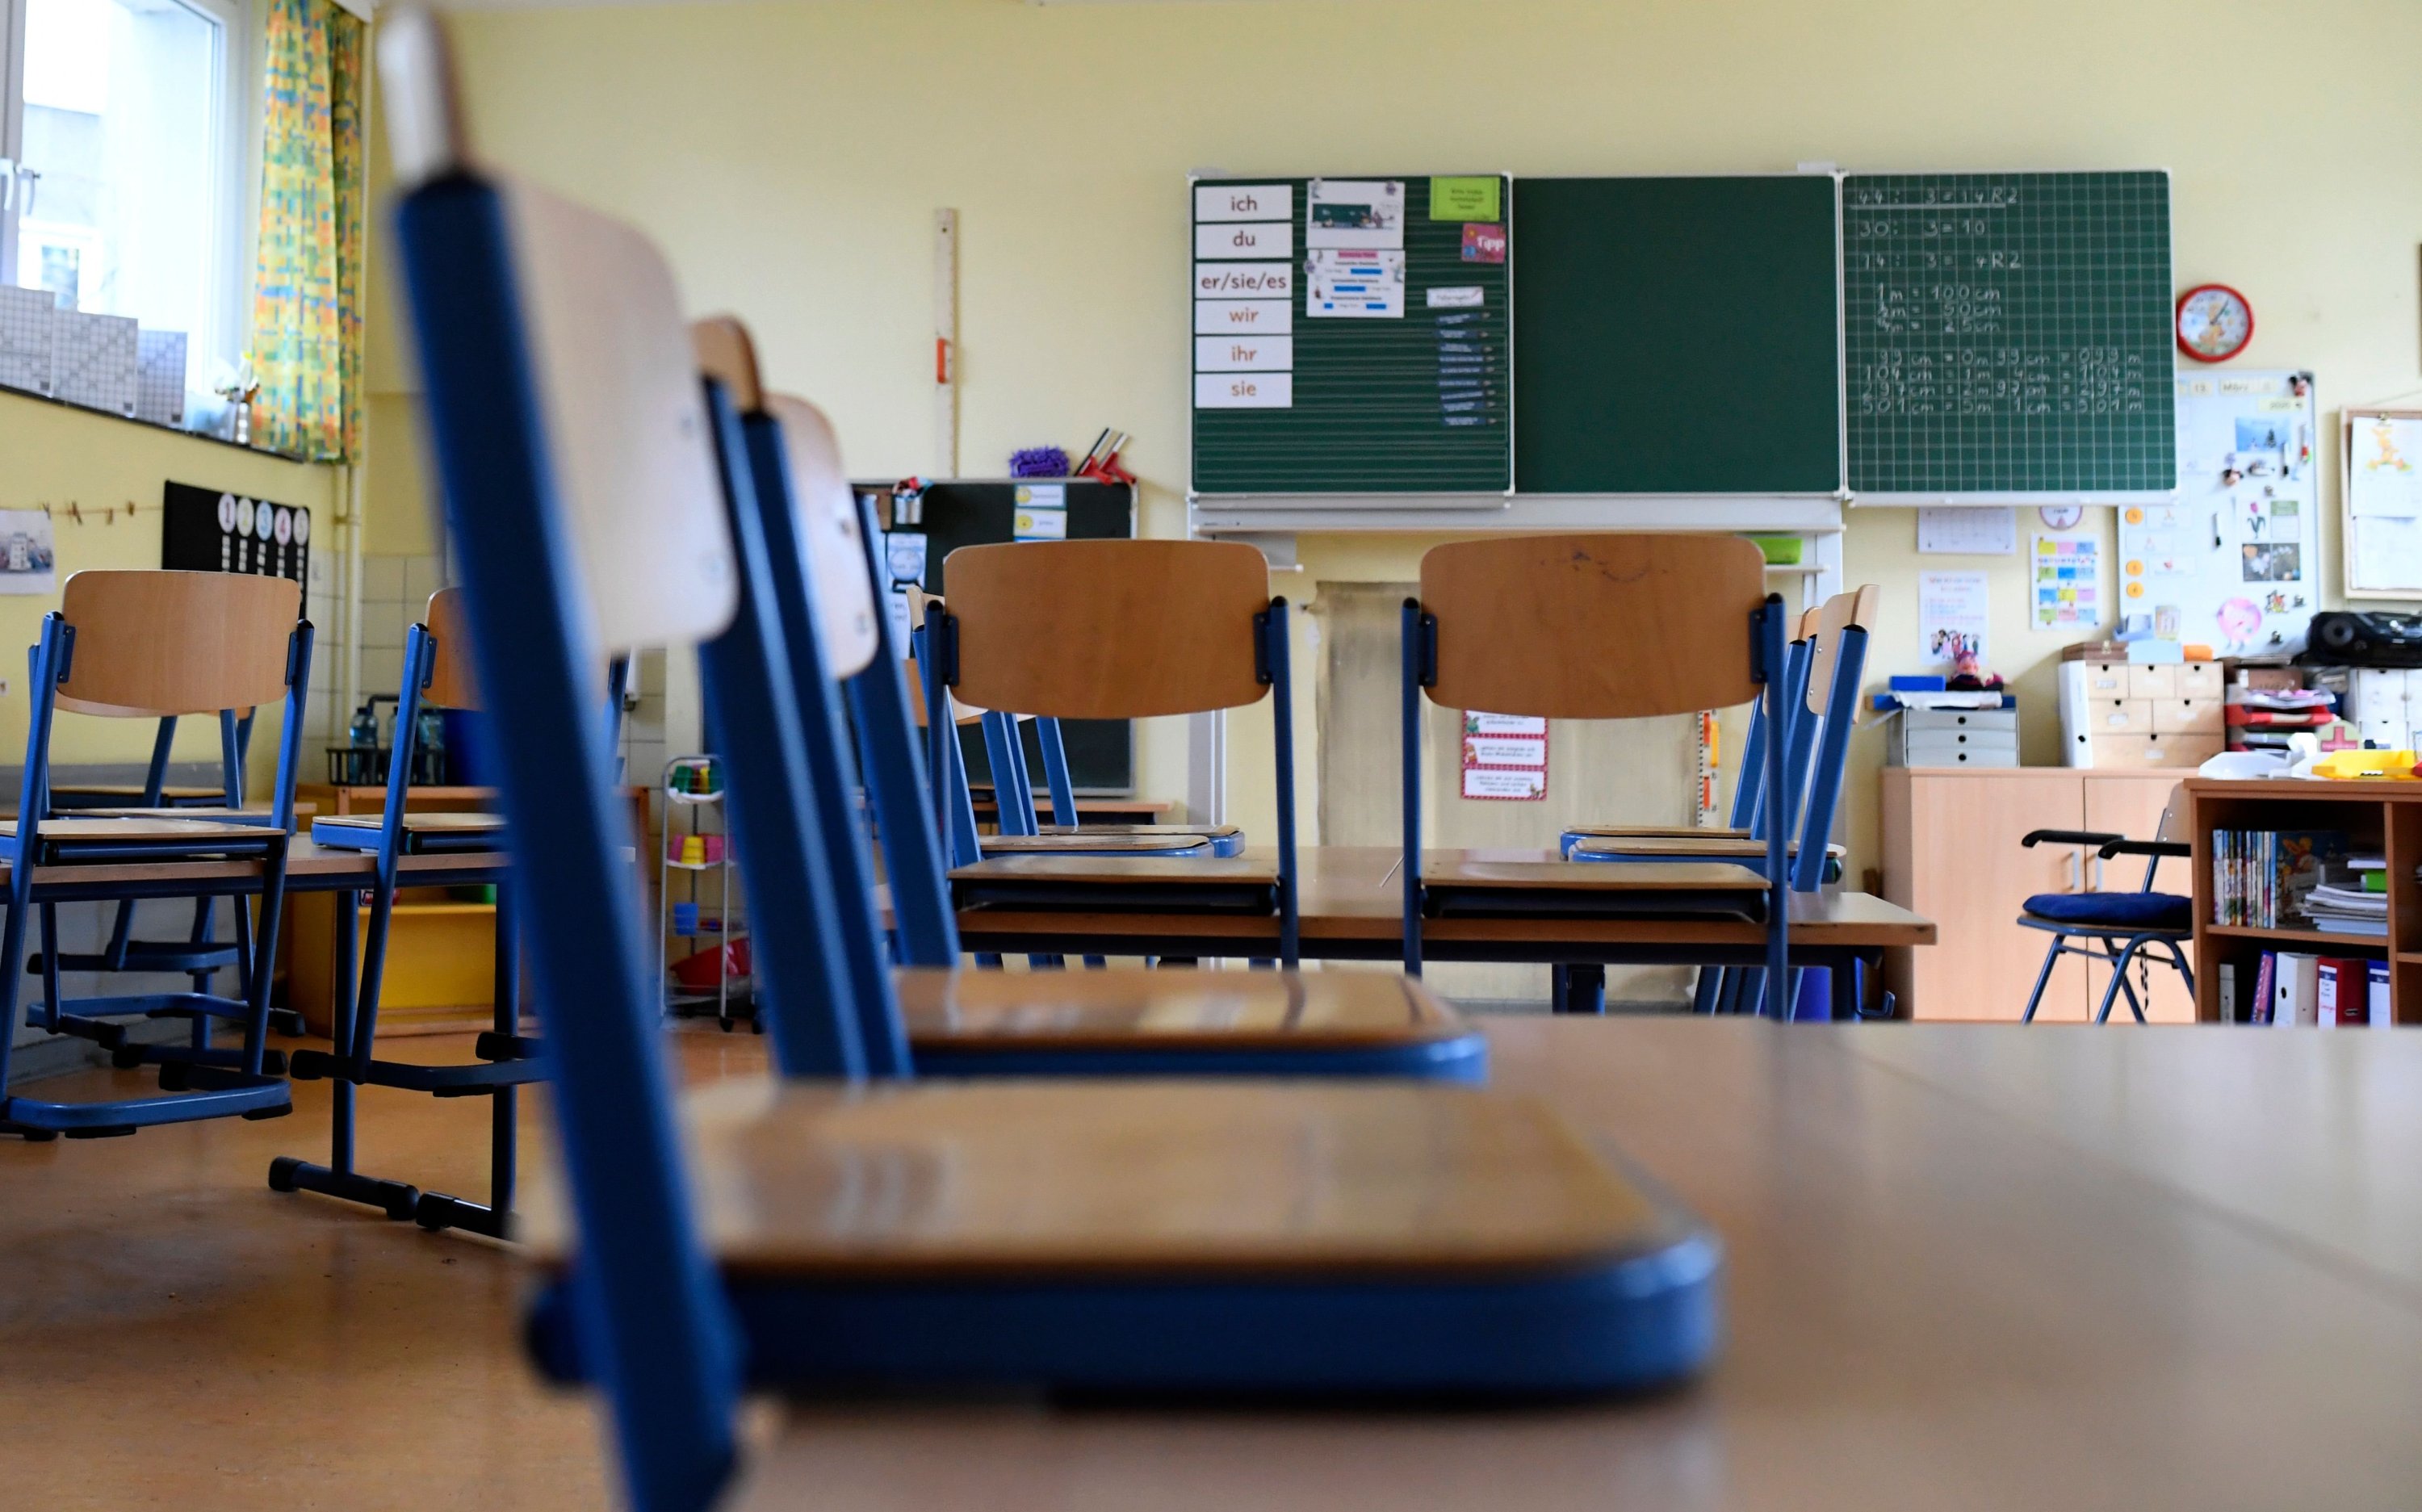 Germany sees rise of anti-Semitism in schools, watchdog warns | Daily Sabah